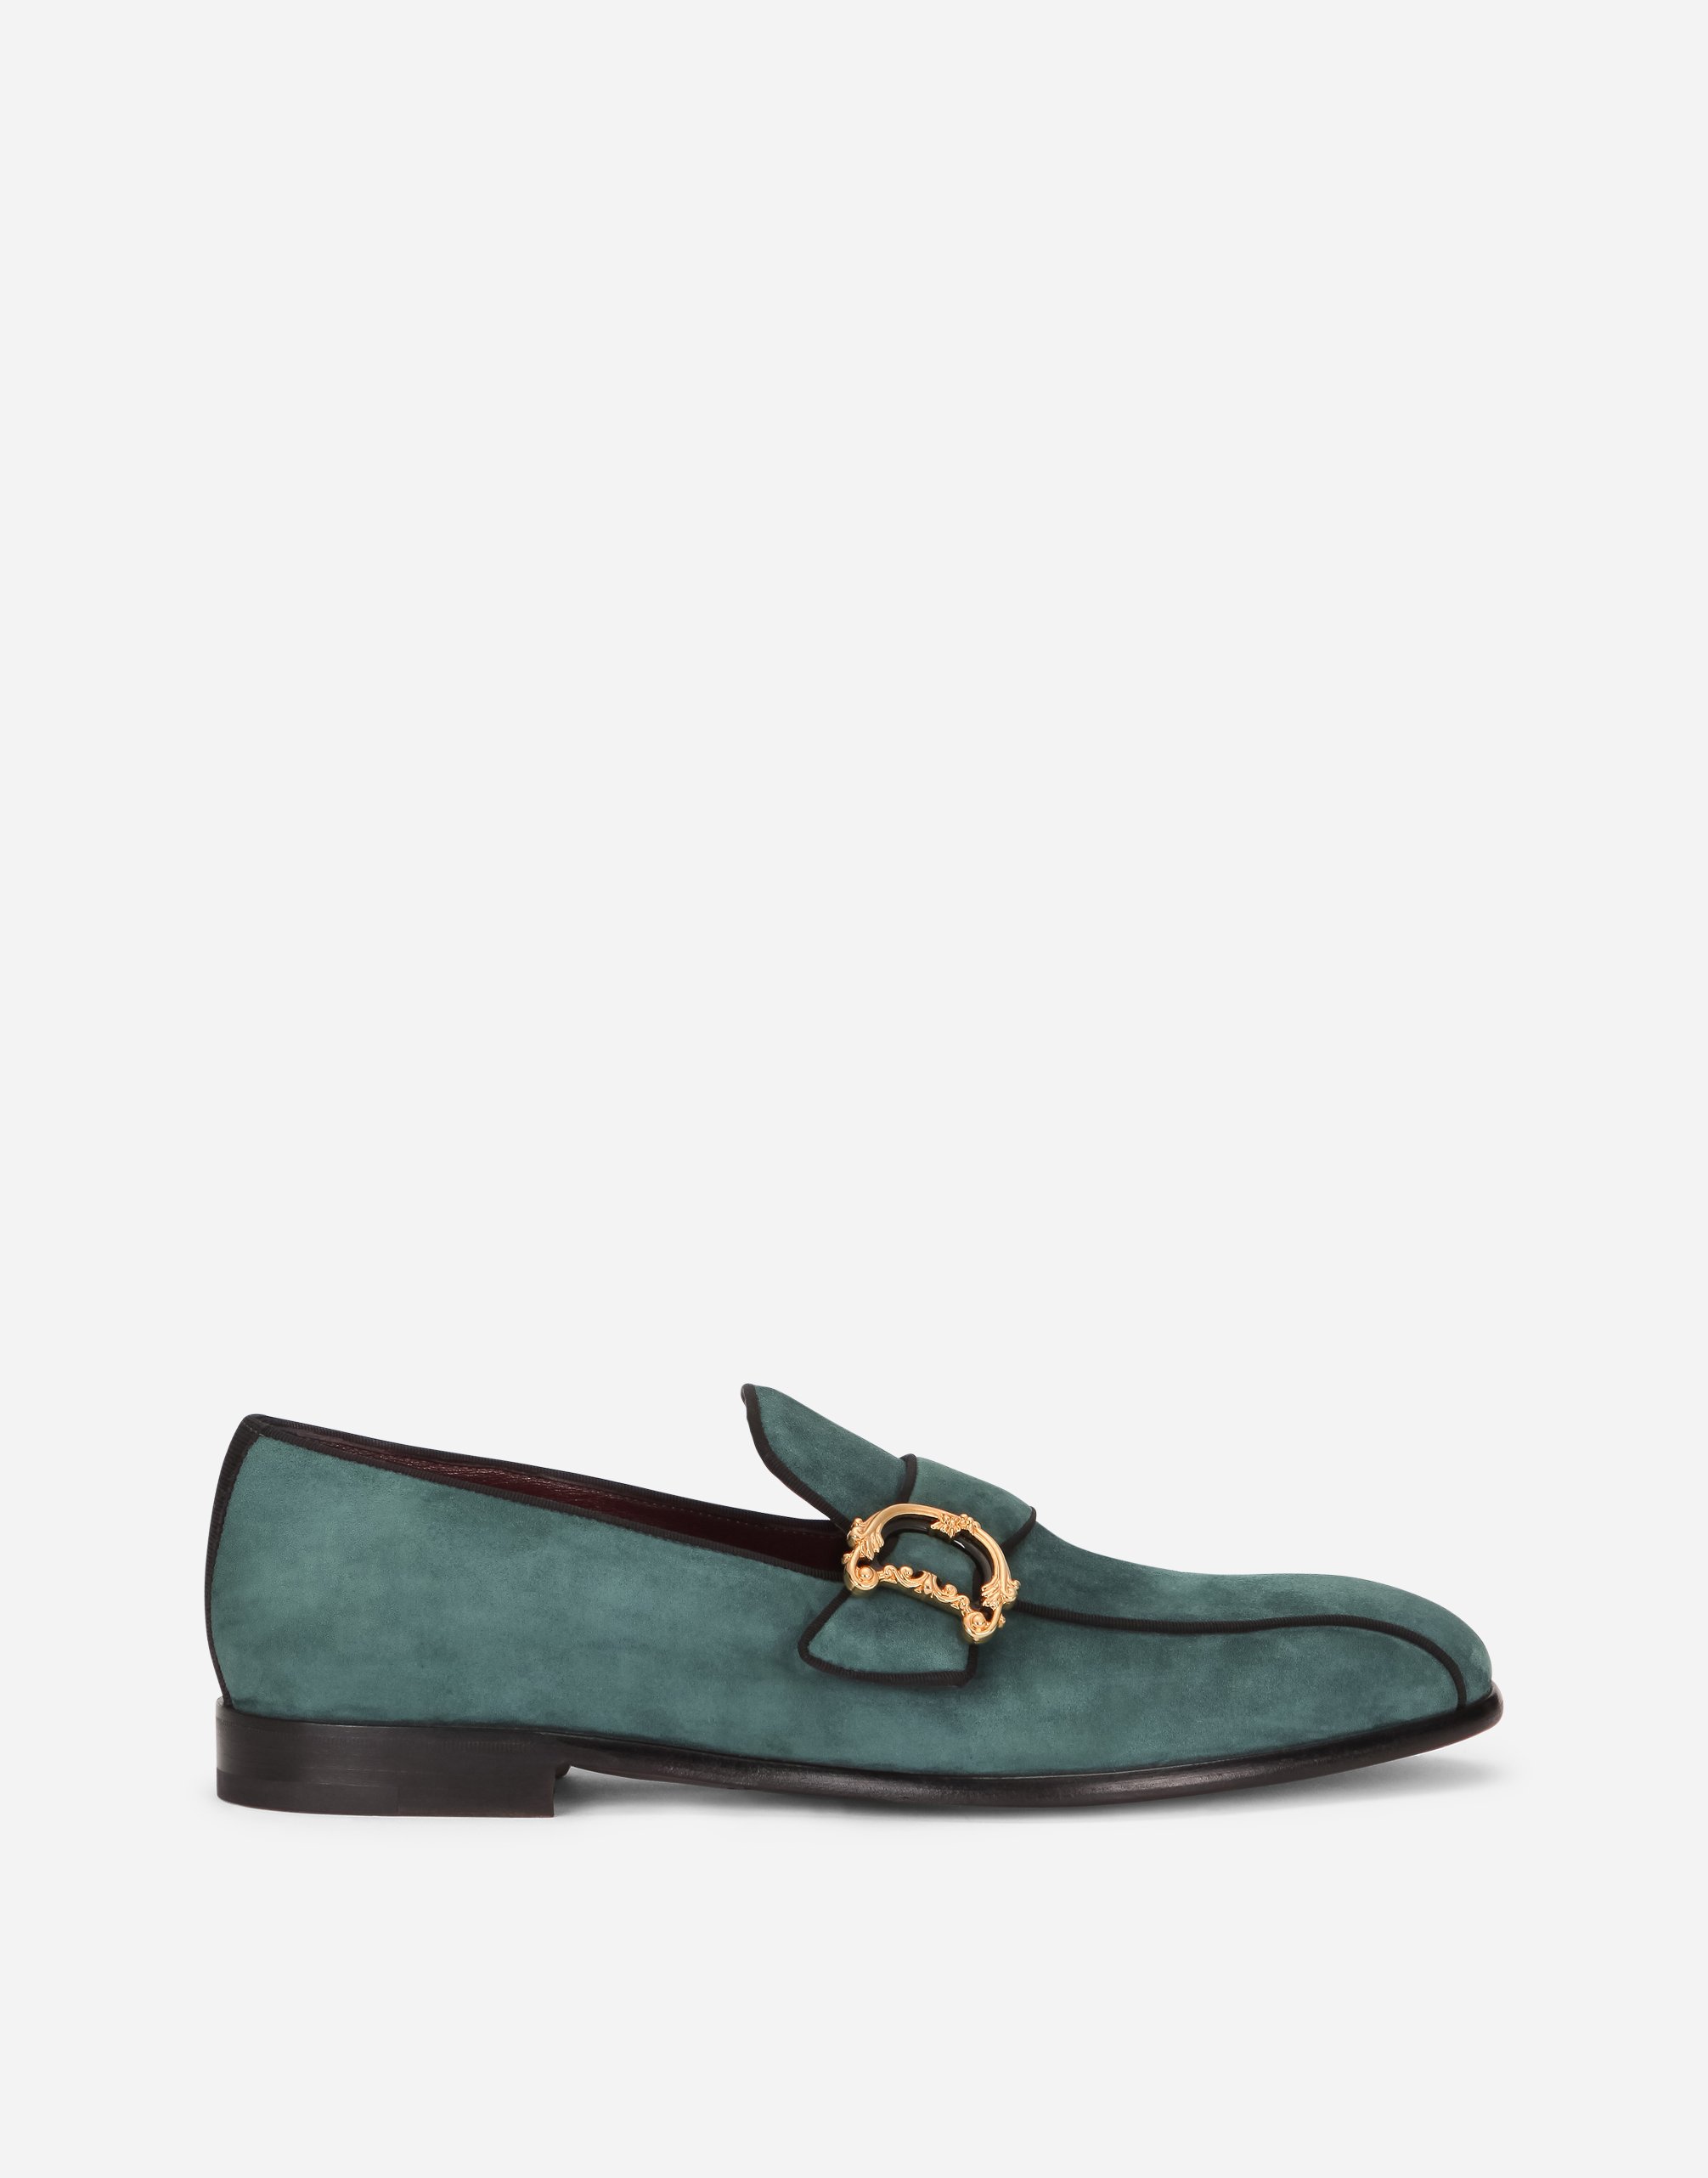 DOLCE & GABBANA SUEDE LOAFERS WITH BAROQUE DG LOGO